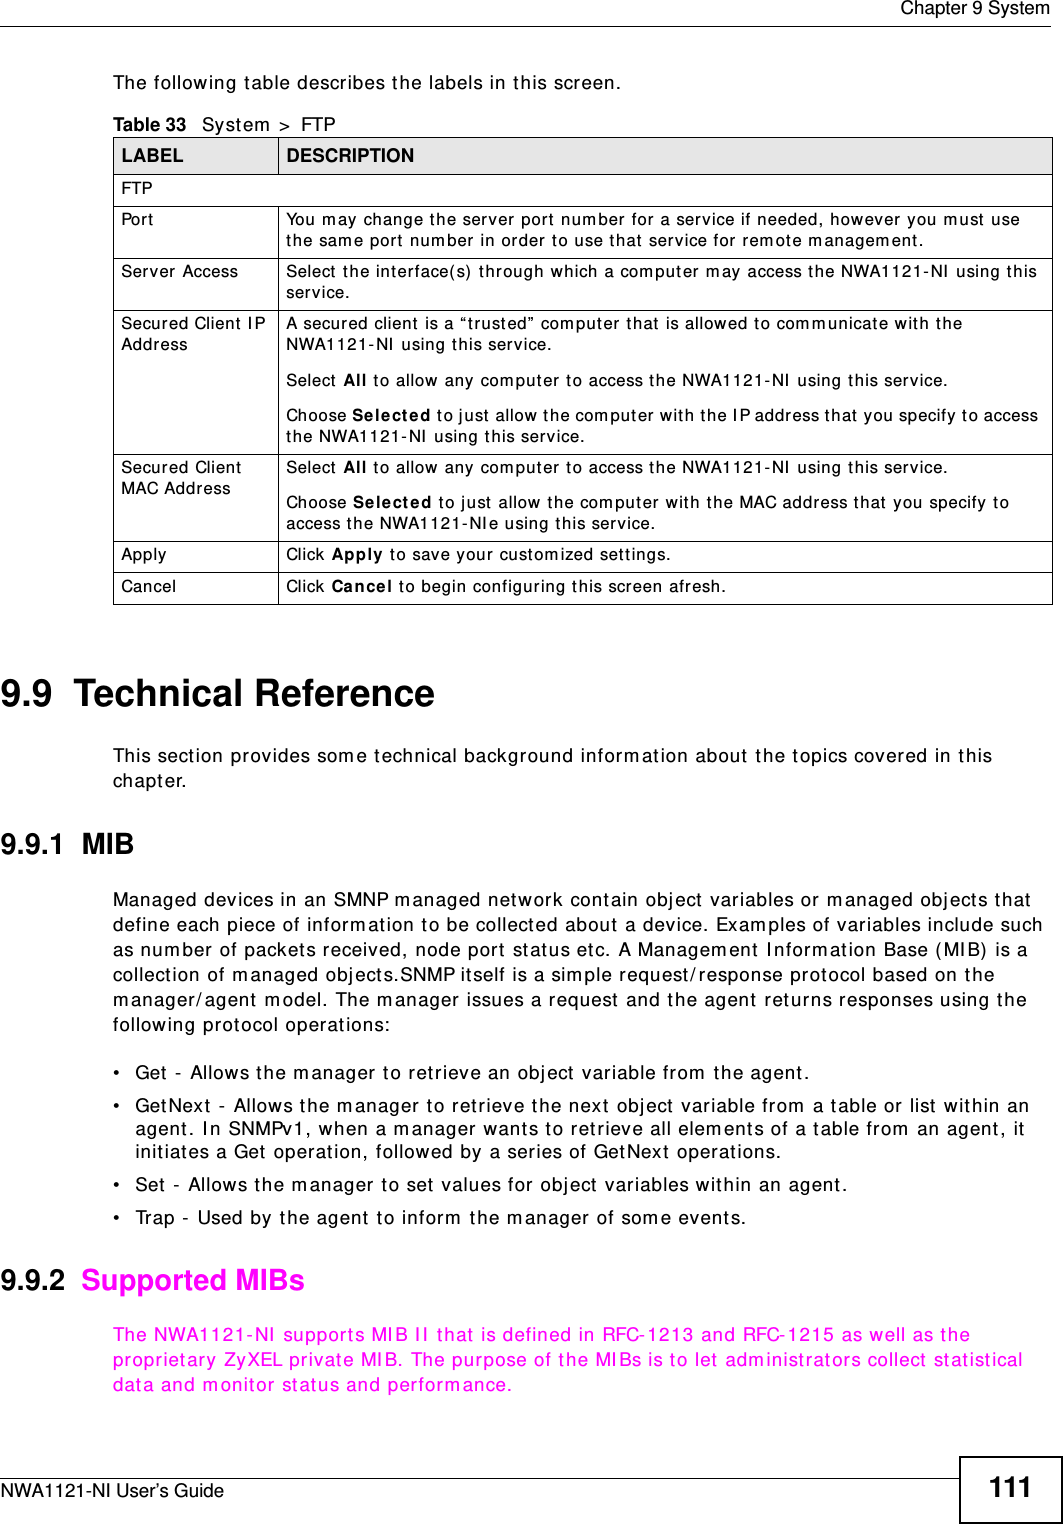  Chapter 9 SystemNWA1121-NI User’s Guide 111The following table describes the labels in this screen.9.9  Technical ReferenceThis section provides some technical background information about the topics covered in this chapter. 9.9.1  MIBManaged devices in an SMNP managed network contain object variables or managed objects that define each piece of information to be collected about a device. Examples of variables include such as number of packets received, node port status etc. A Management Information Base (MIB) is a collection of managed objects.SNMP itself is a simple request/response protocol based on the manager/agent model. The manager issues a request and the agent returns responses using the following protocol operations:• Get - Allows the manager to retrieve an object variable from the agent. • GetNext - Allows the manager to retrieve the next object variable from a table or list within an agent. In SNMPv1, when a manager wants to retrieve all elements of a table from an agent, it initiates a Get operation, followed by a series of GetNext operations. • Set - Allows the manager to set values for object variables within an agent. • Trap - Used by the agent to inform the manager of some events.9.9.2  Supported MIBsThe NWA1121-NI supports MIB II that is defined in RFC-1213 and RFC-1215 as well as the proprietary ZyXEL private MIB. The purpose of the MIBs is to let administrators collect statistical data and monitor status and performance.Table 33   System &gt; FTPLABEL DESCRIPTIONFTPPort You may change the server port number for a service if needed, however you must use the same port number in order to use that service for remote management.Server Access Select the interface(s) through which a computer may access the NWA1121-NI using this service.Secured Client IP Address A secured client is a “trusted” computer that is allowed to communicate with the NWA1121-NI using this service. Select All to allow any computer to access the NWA1121-NI using this service.Choose Selected to just allow the computer with the IP address that you specify to access the NWA1121-NI using this service.Secured Client MAC Address Select All to allow any computer to access the NWA1121-NI using this service.Choose Selected to just allow the computer with the MAC address that you specify to access the NWA1121-NIe using this service.Apply Click Apply to save your customized settings. Cancel Click Cancel to begin configuring this screen afresh.